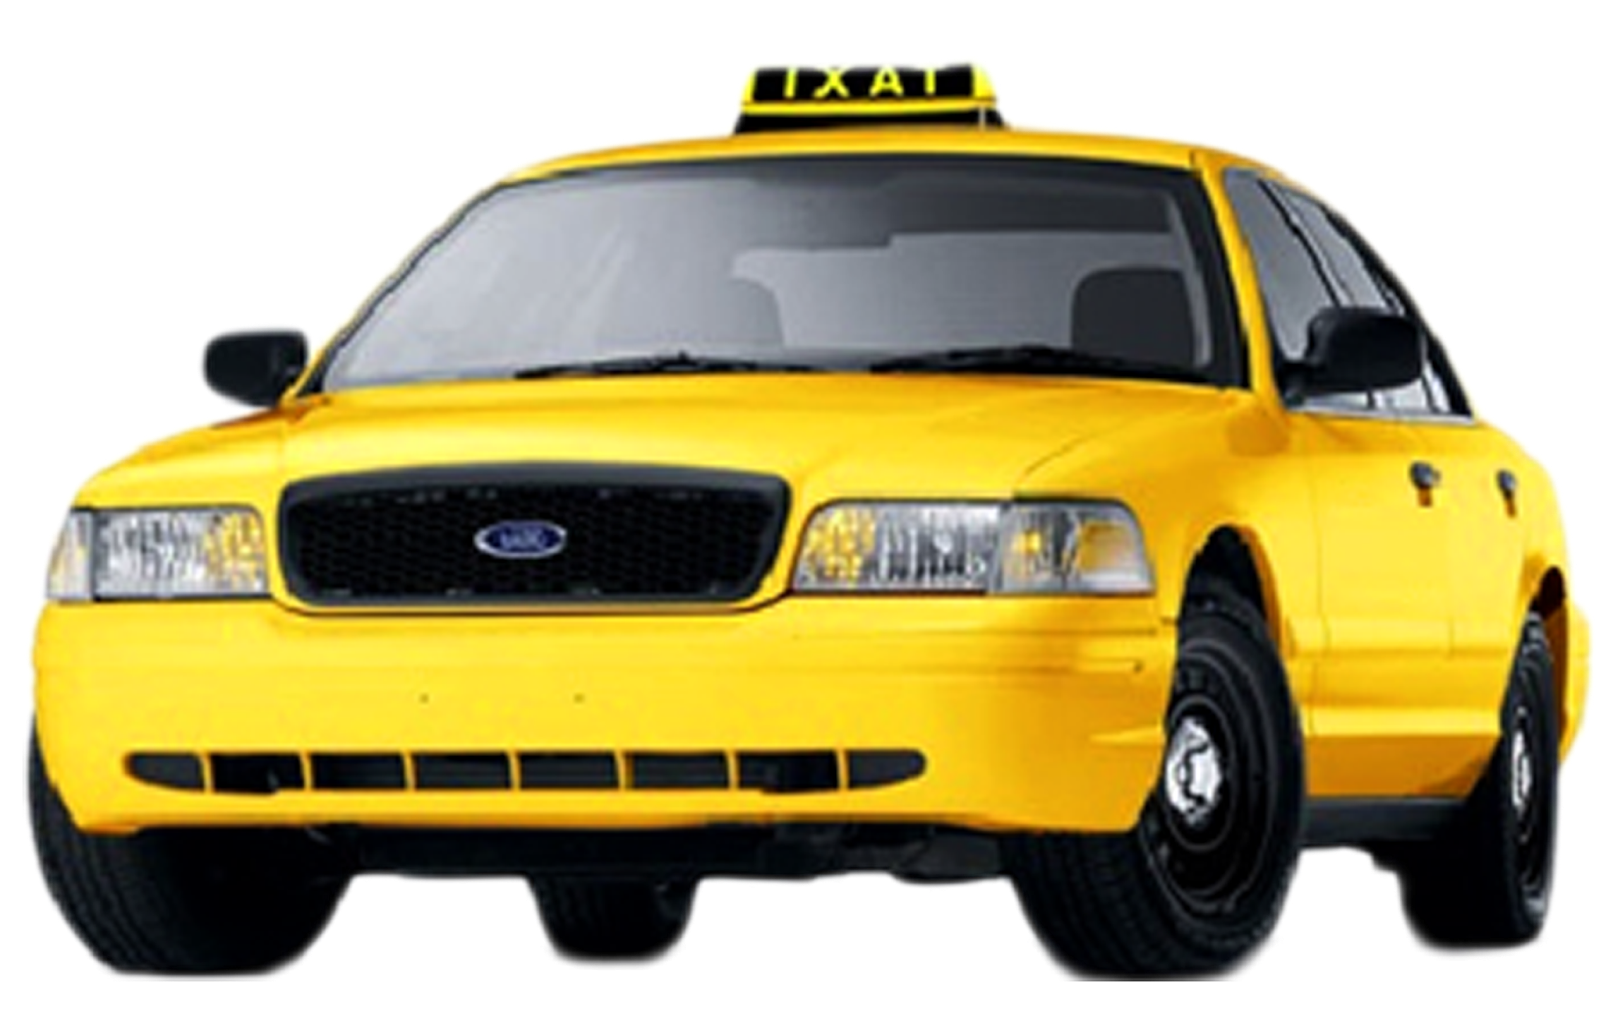 Taxi Cab High-Quality Png PNG Image, Taxi HD PNG - Free PNG